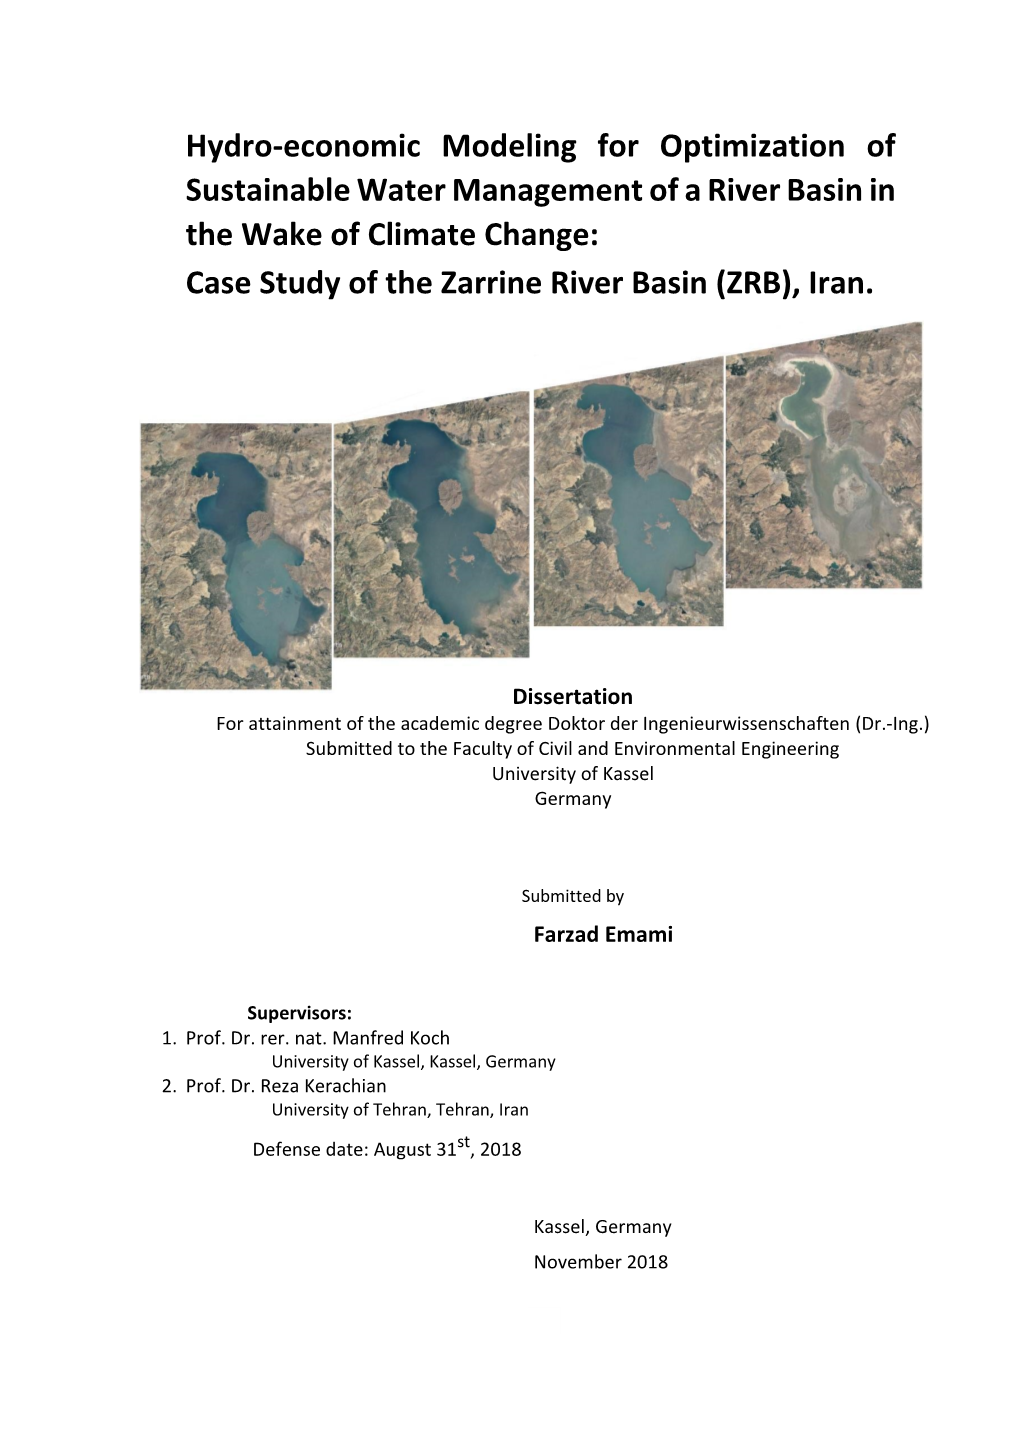 Hydro-Economic Modeling for Optimization of Sustainable Water Management of a River Basin in the Wake of Climate Change